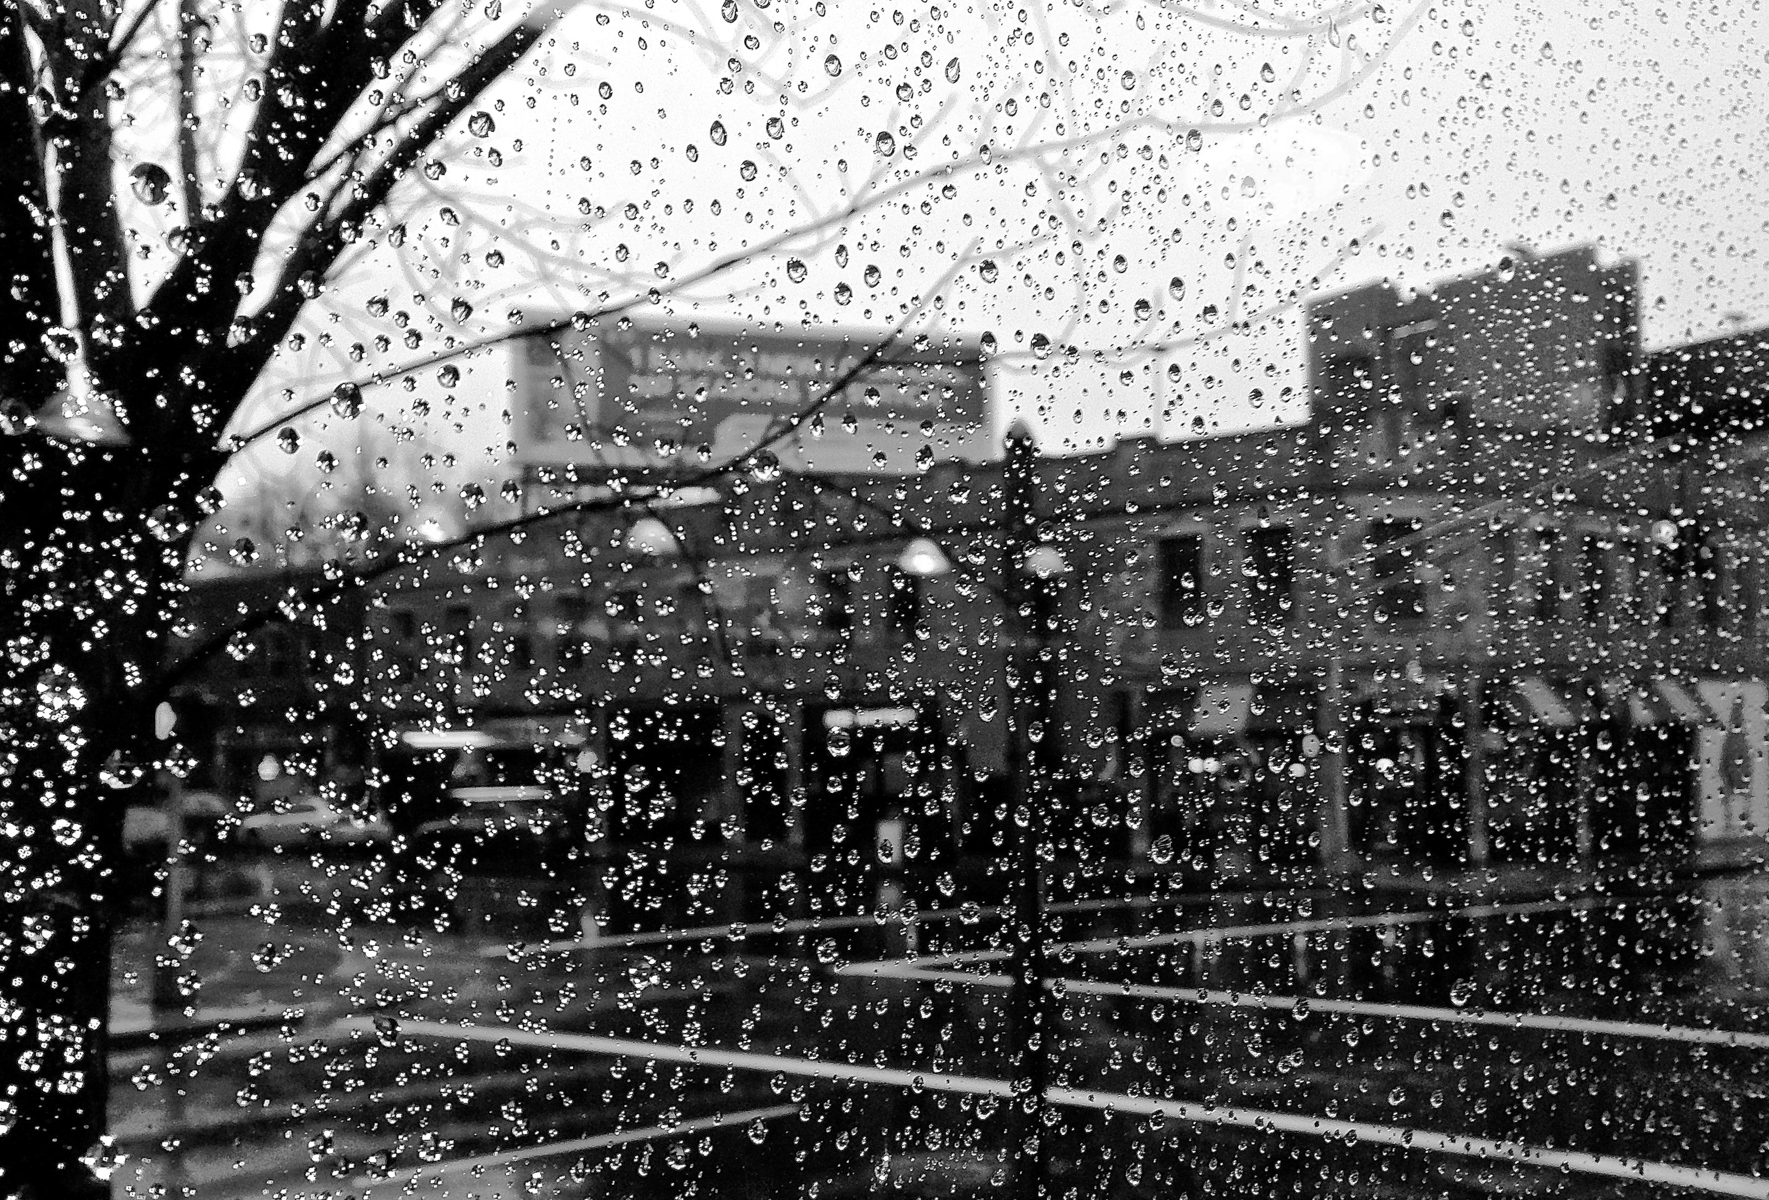 Watching rain on a winter day from inside a cafe